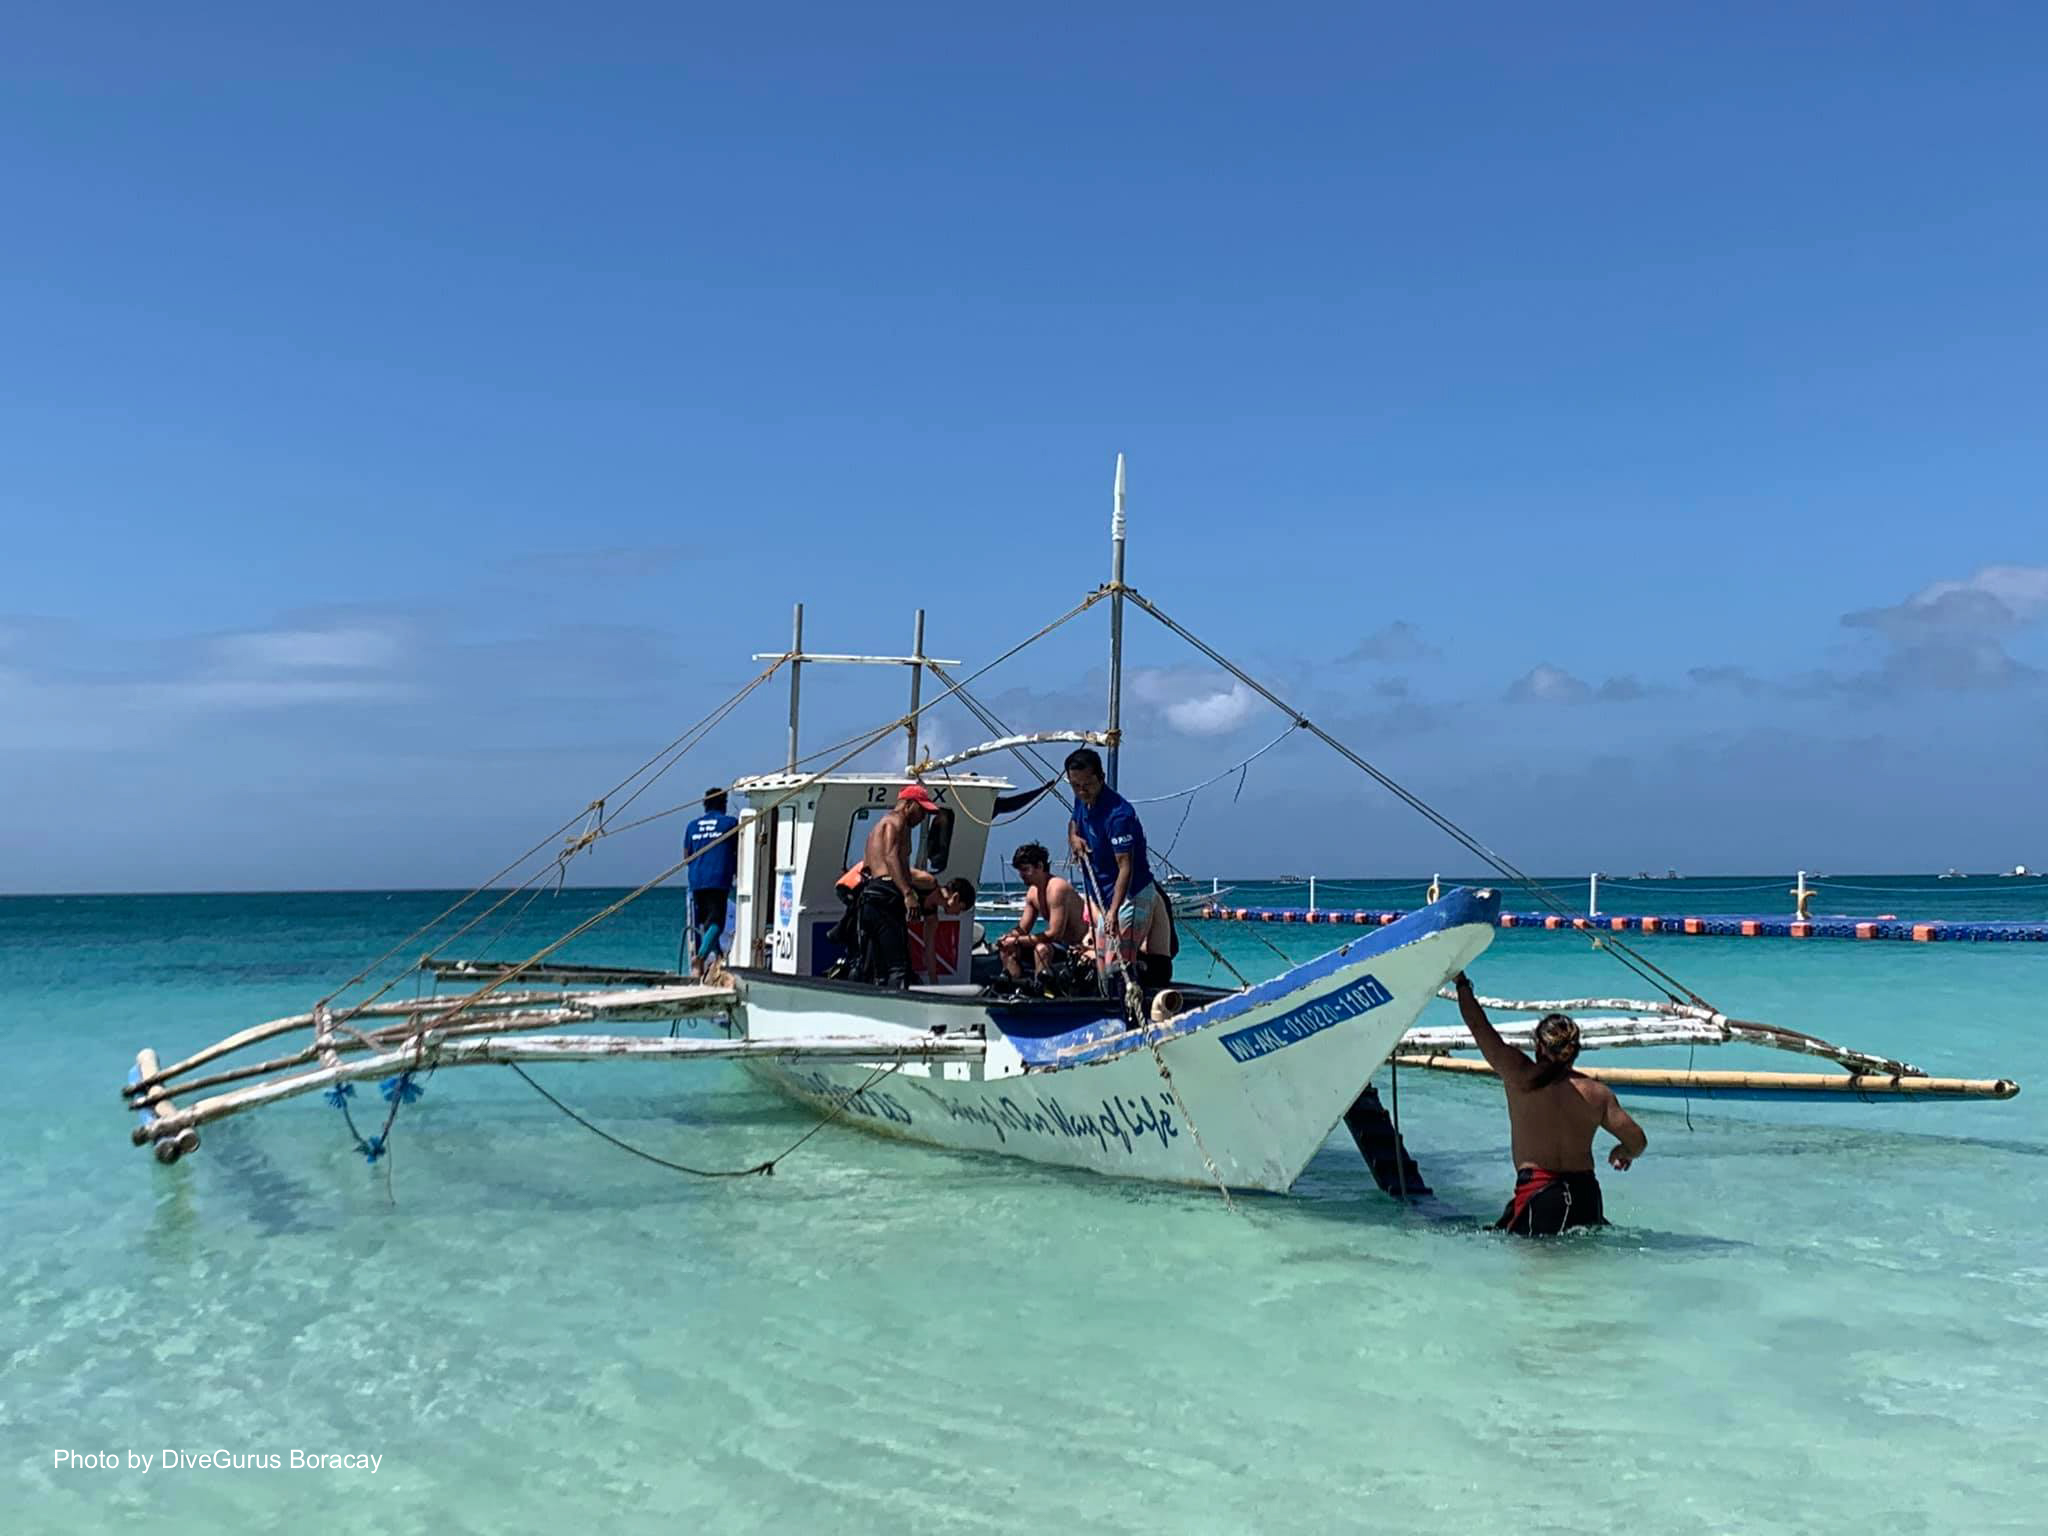 Divers riding a boat going to a dive spot in Boracay